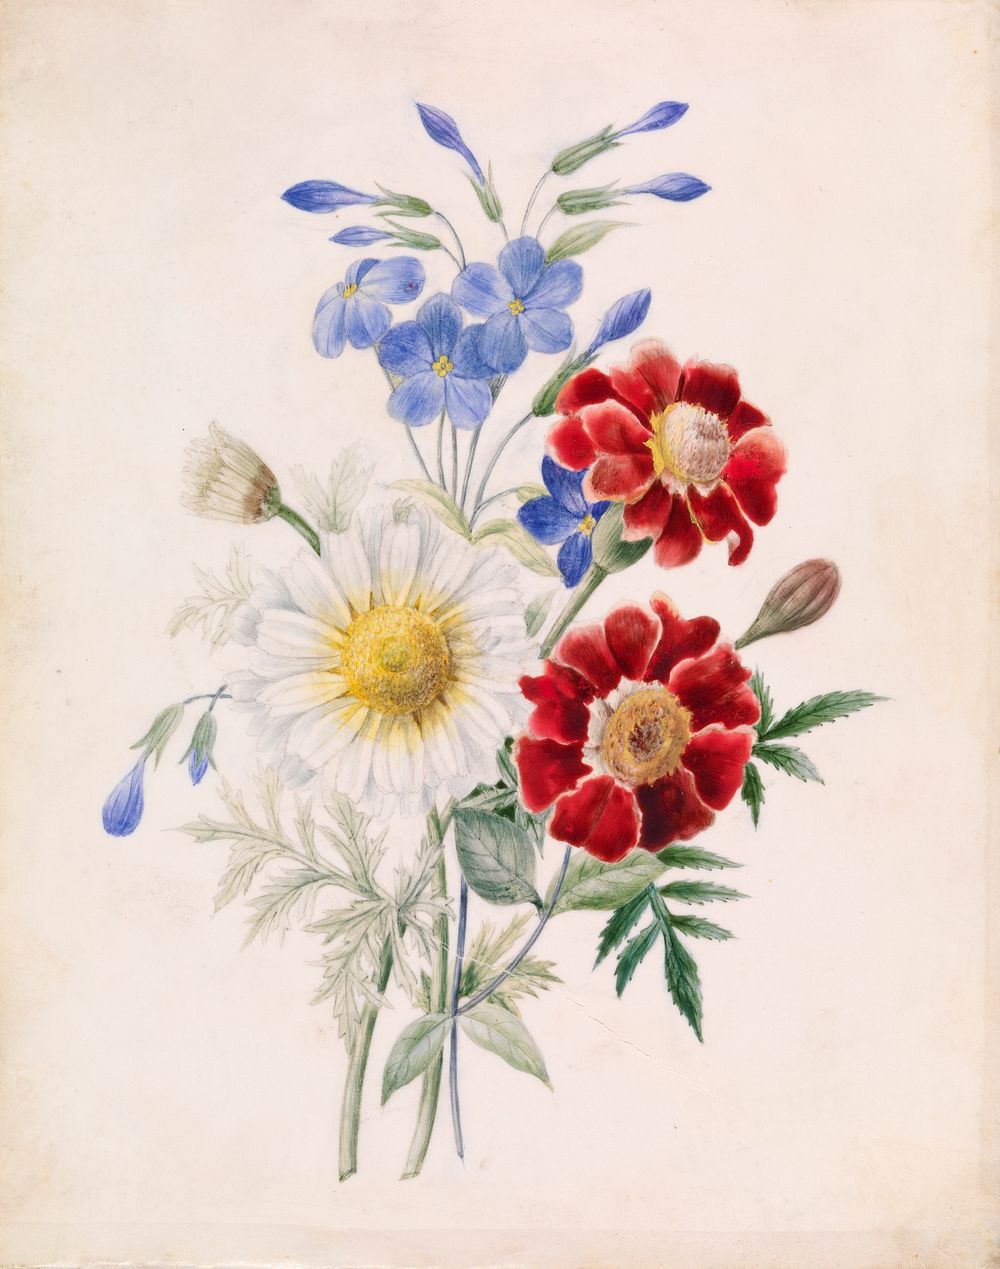 Red and Blue Flowers and White Daisy by Unidentified artist